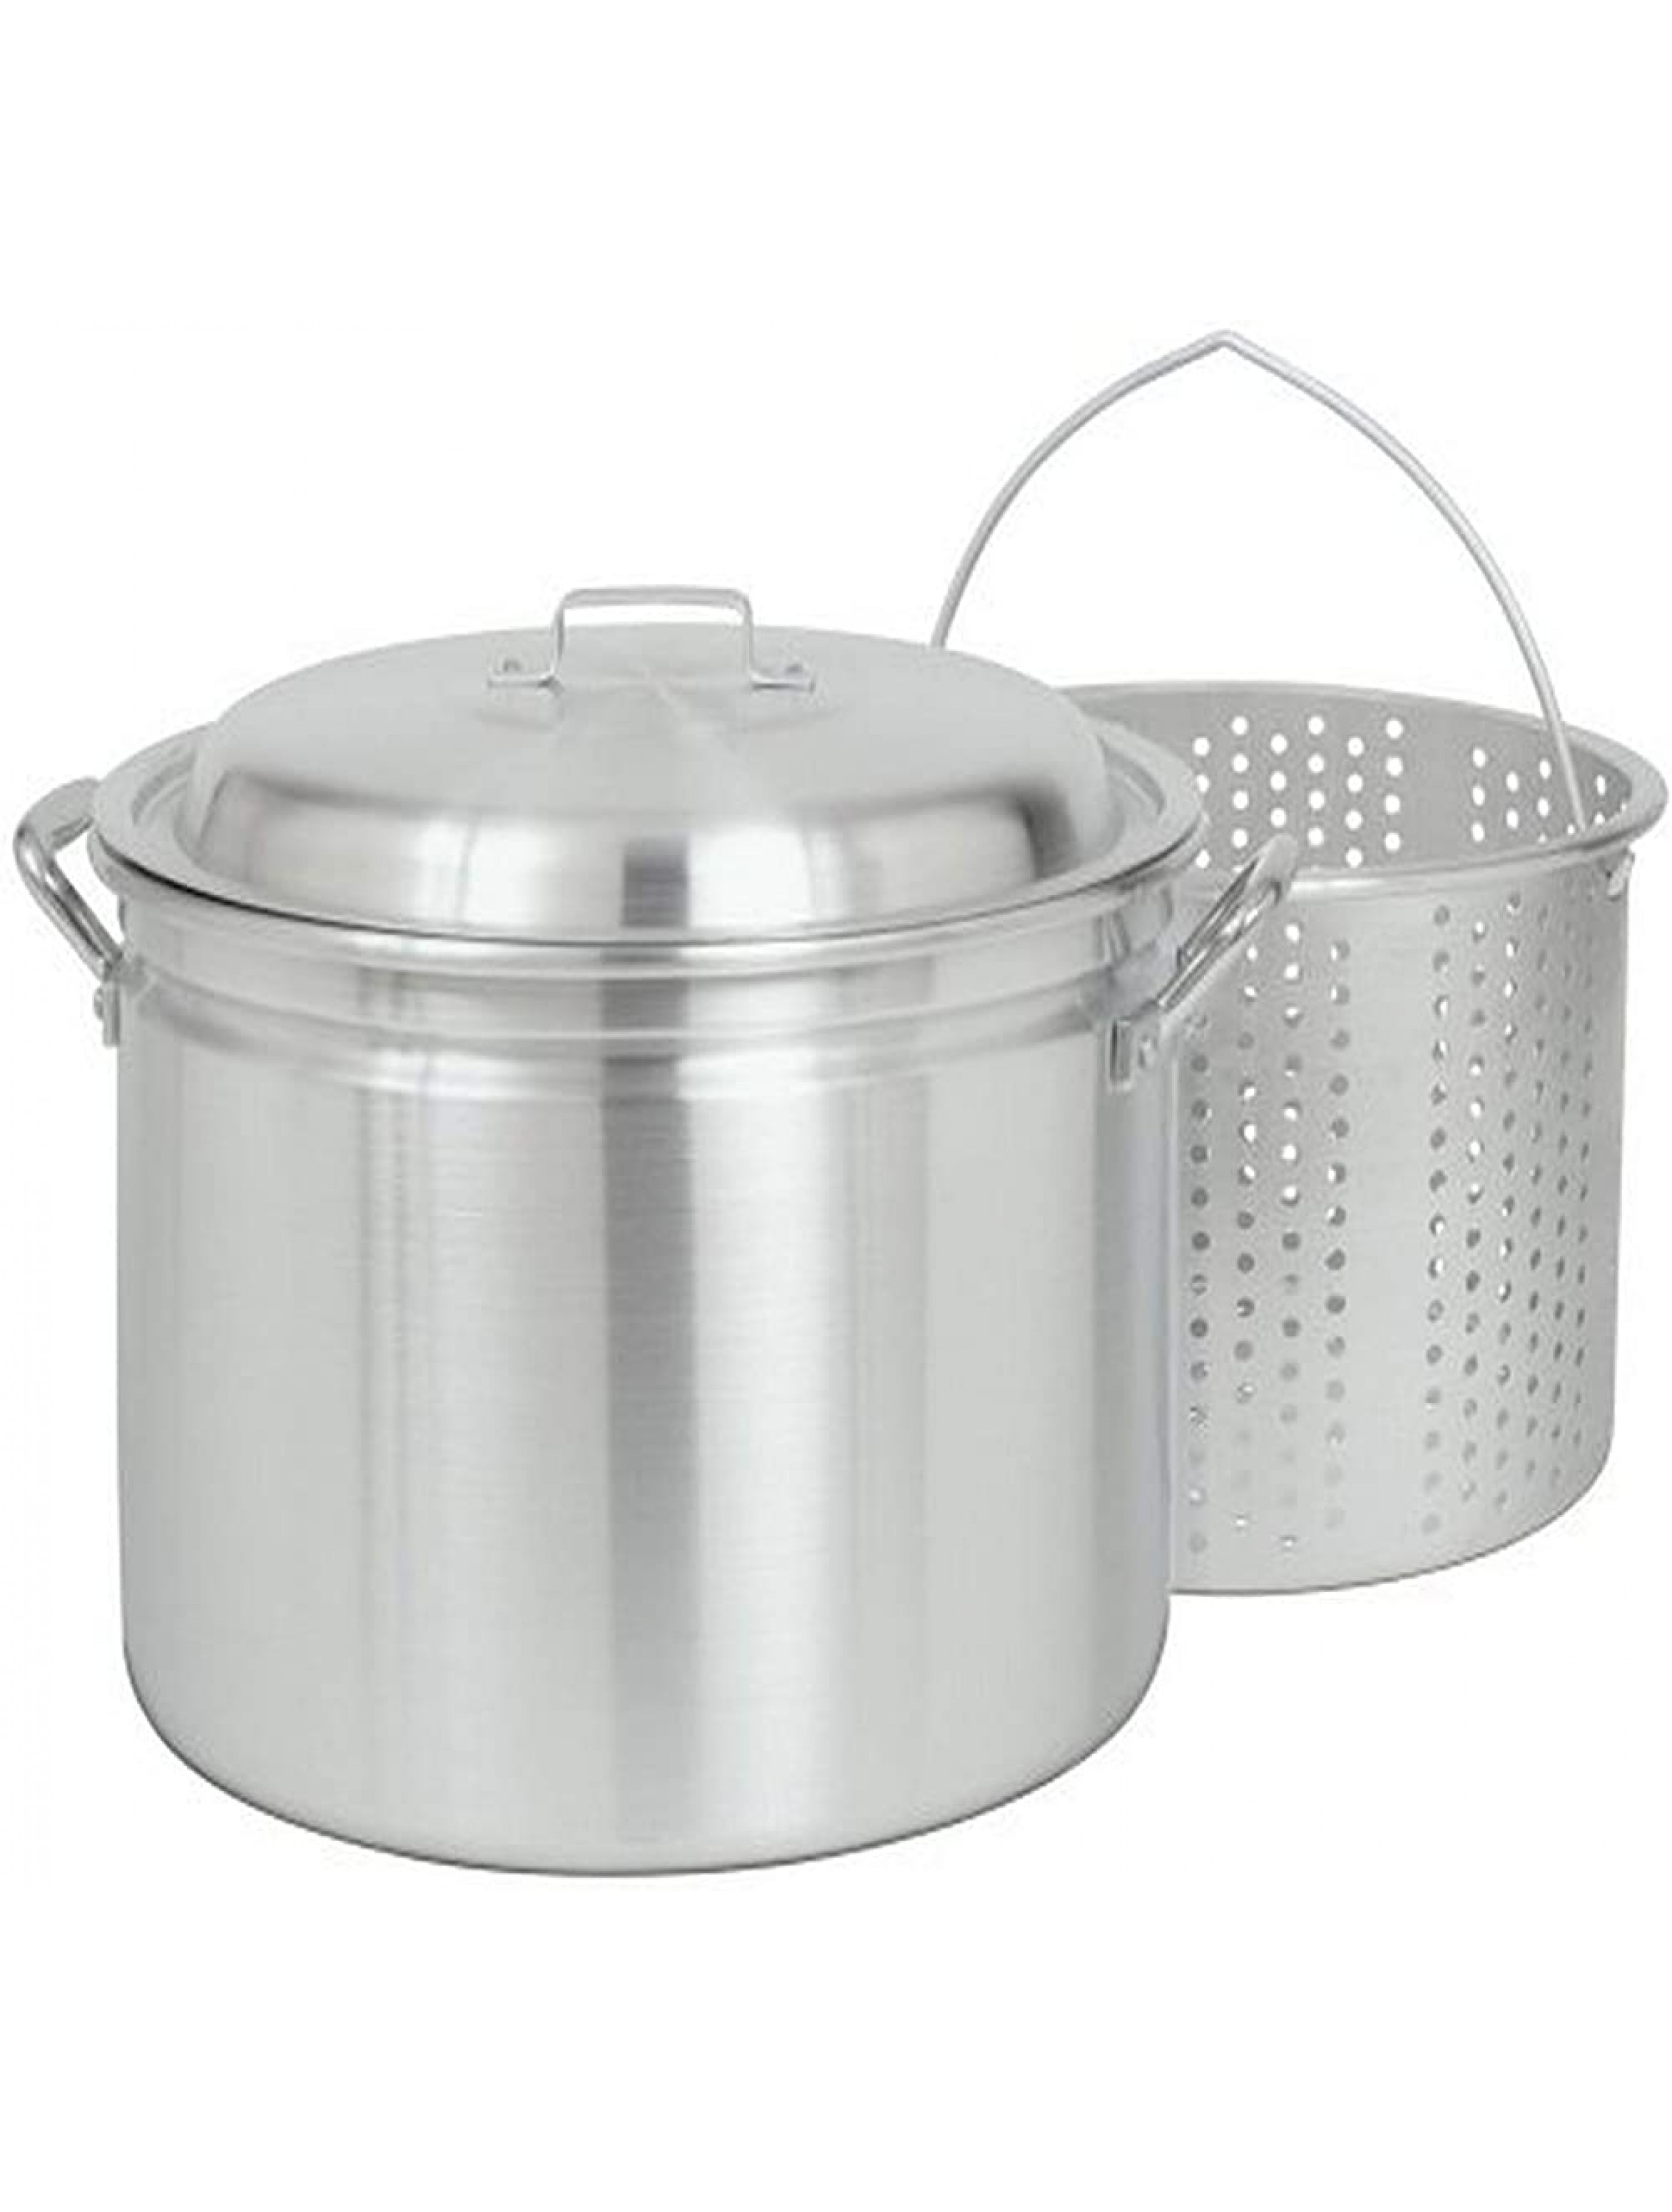 Bayou Classic 4020 20-Qt. Stockpot with Boiling Basket and Vented Lid aluminum - B1PK3ZRL0